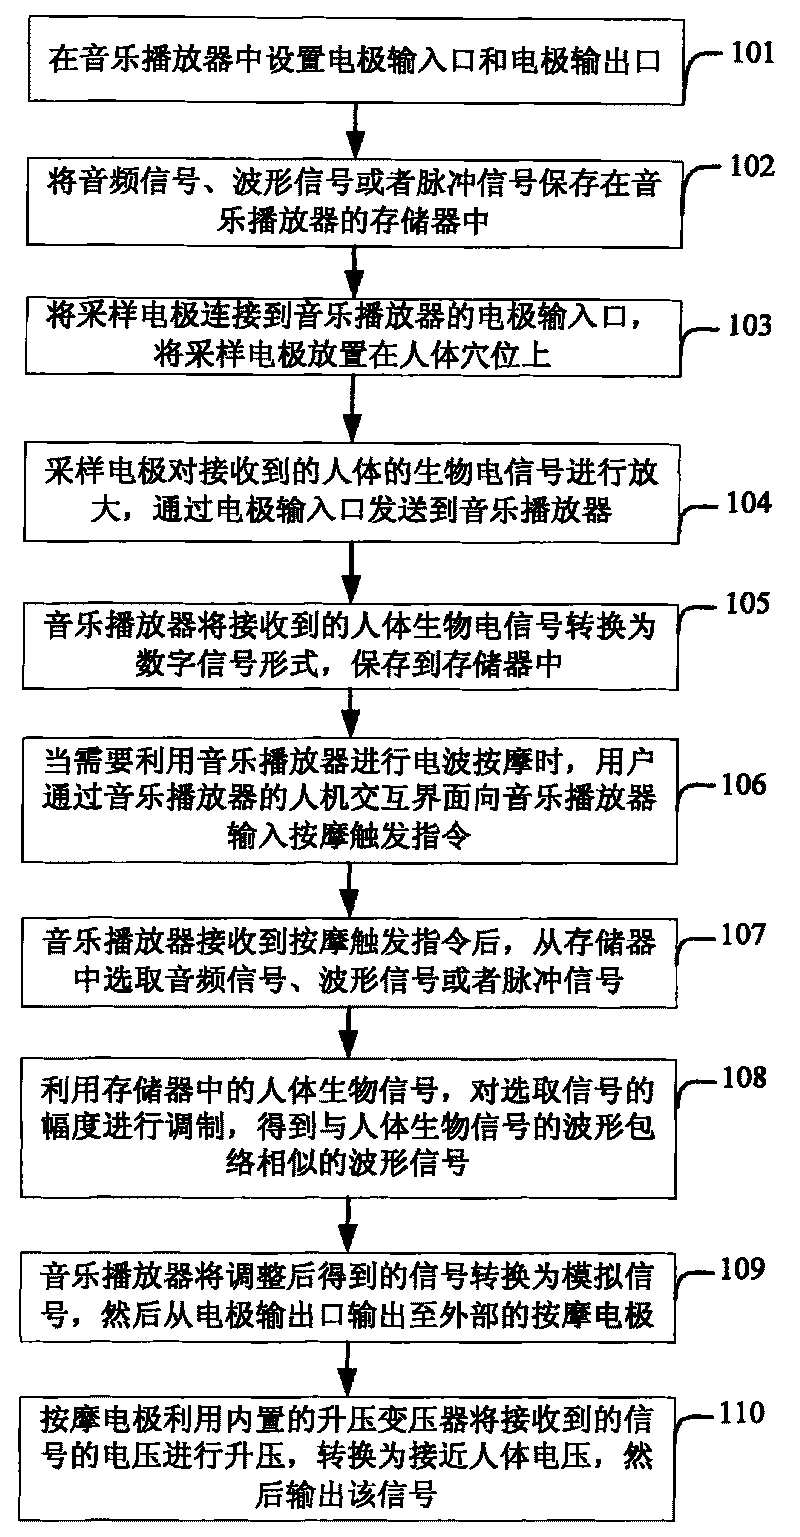 Method for electric wave massage by utilizing music player and electric wave massage device